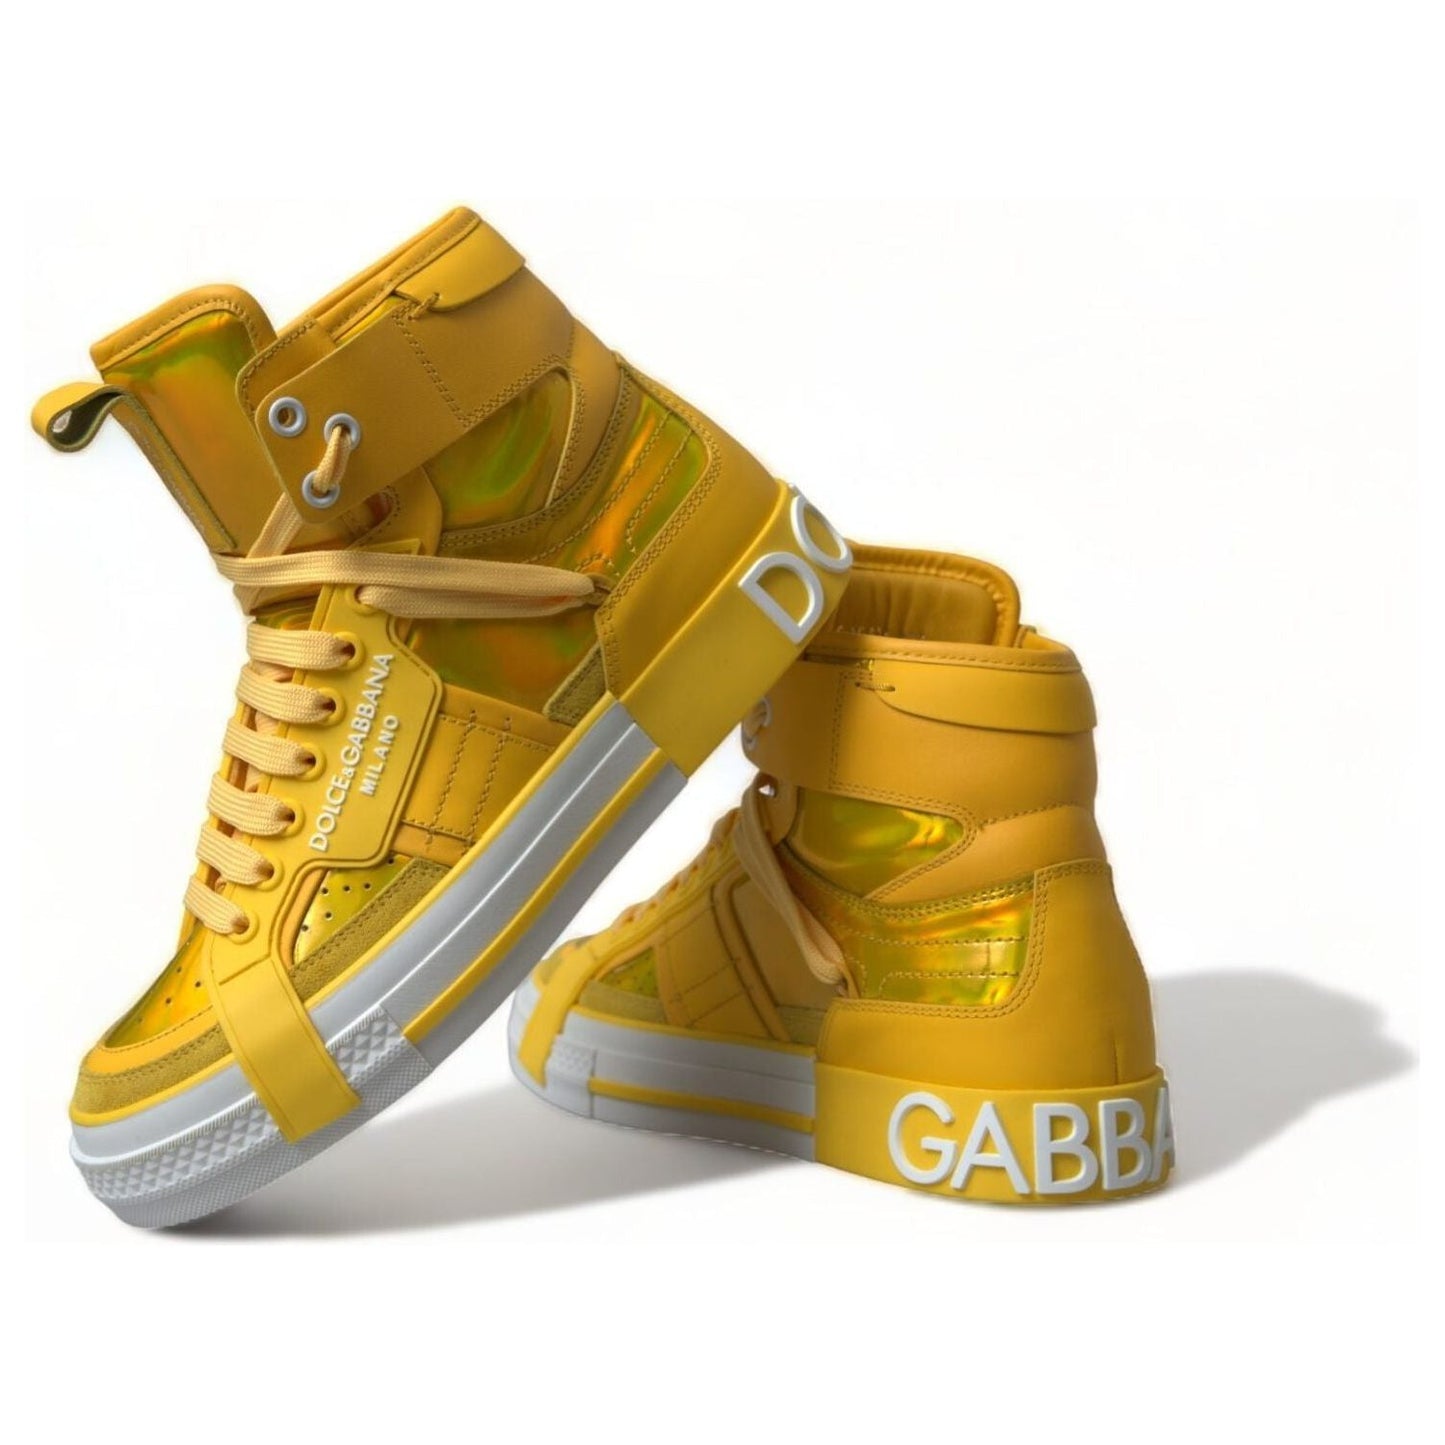 Dolce & Gabbana Chic High-Top Color-Block Sneakers yellow-white-leather-high-top-sneakers-shoes